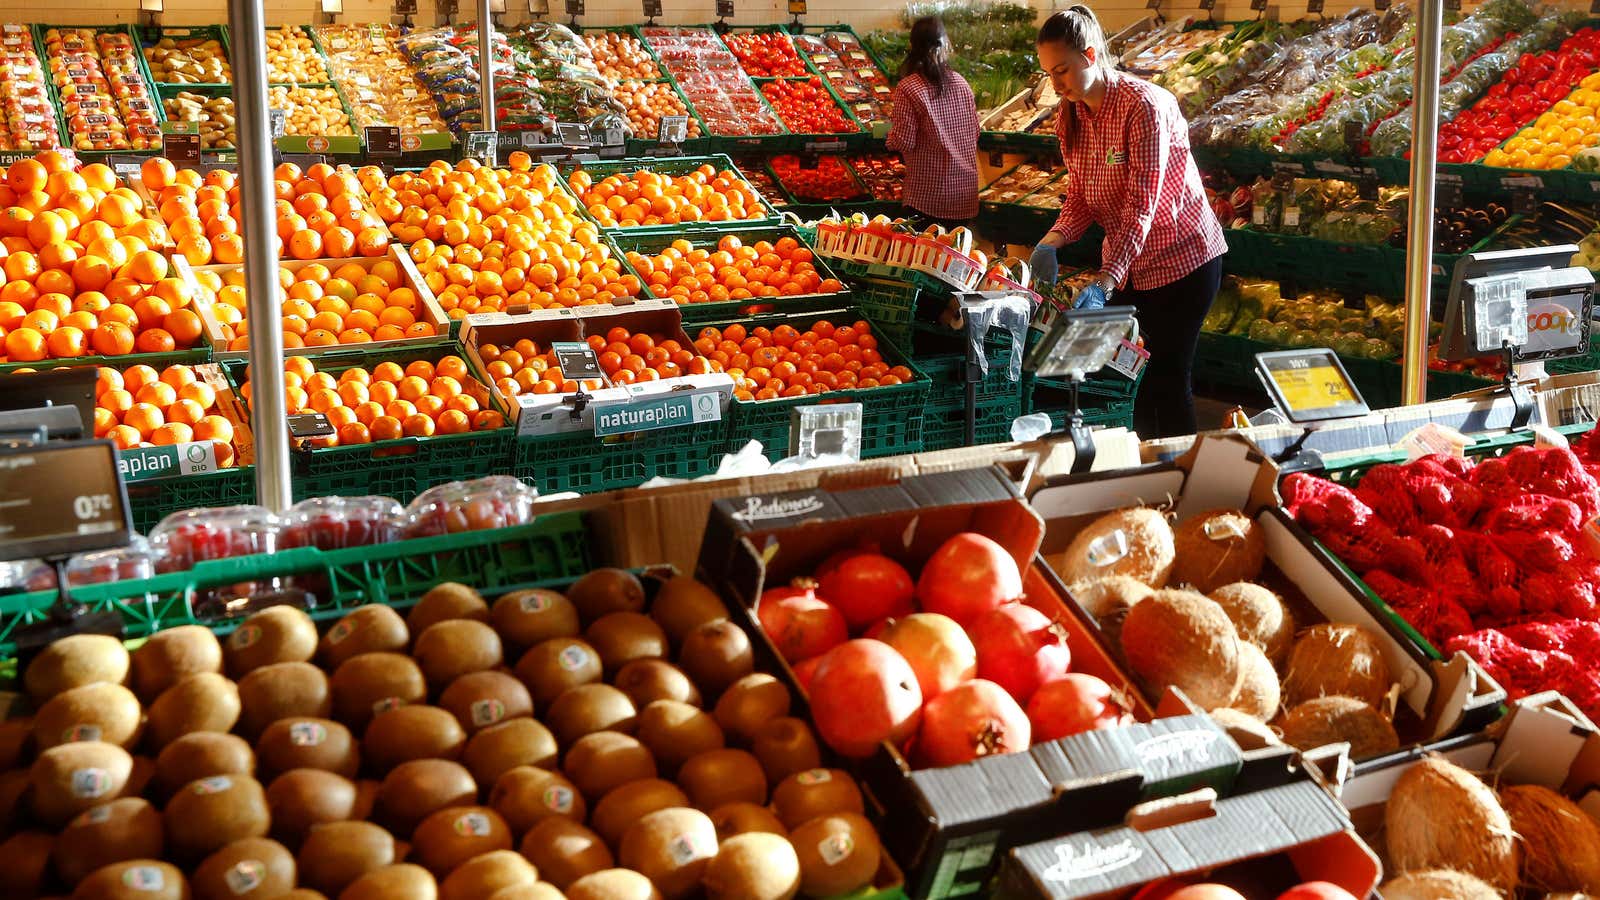 Organic shoppers—innocent and sustainable, or environmental foes?